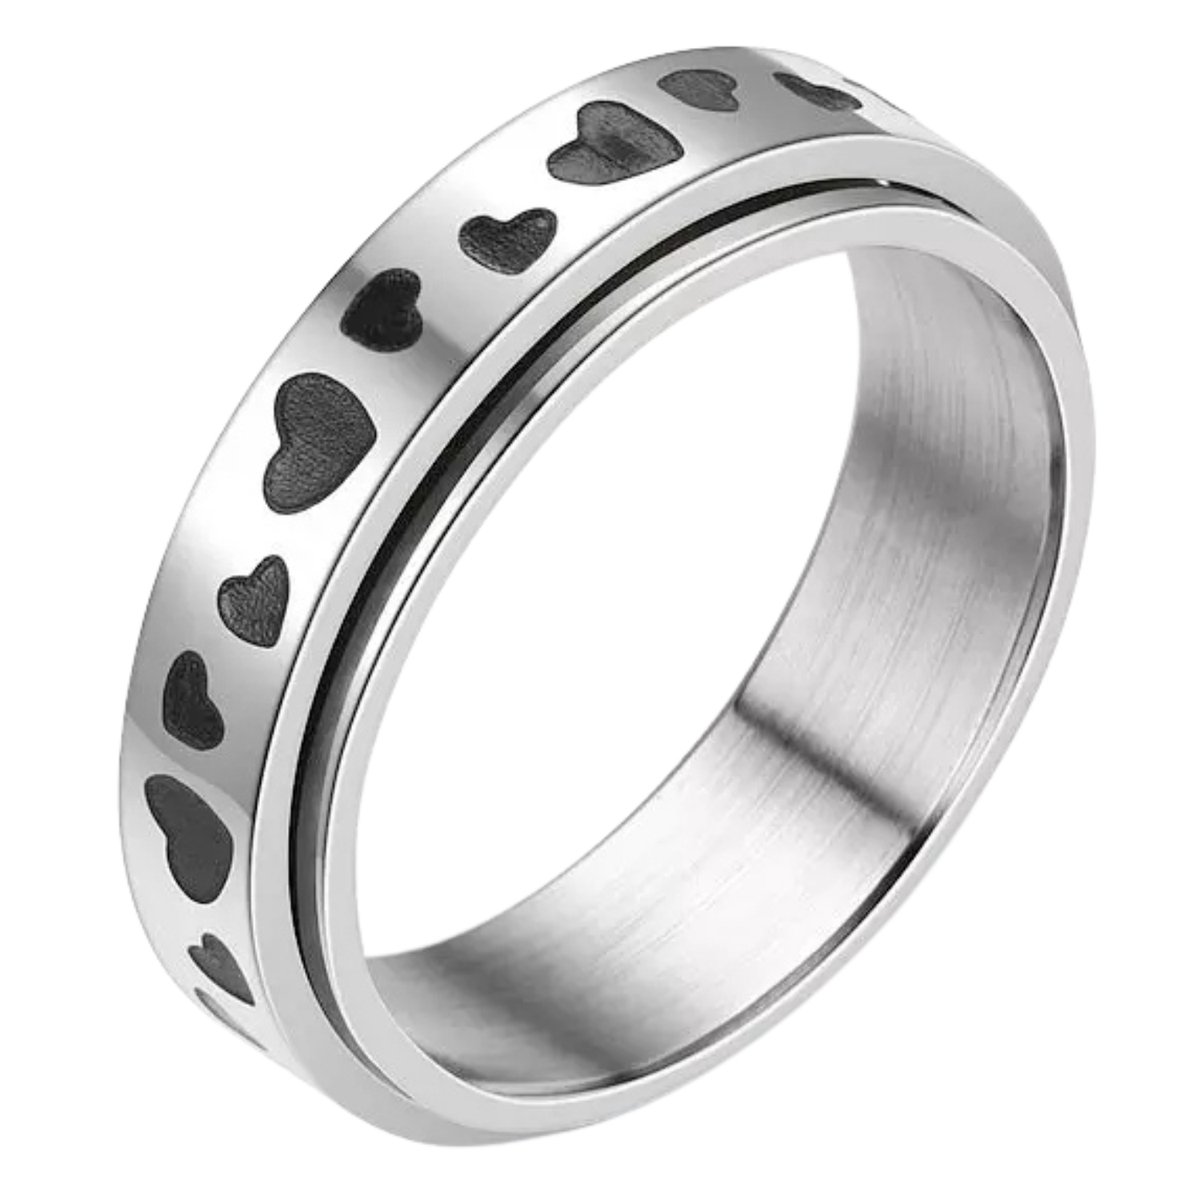 Anxiety Ring - (Hartjes) - Stress Ring - Fidget Ring - Draaibare Ring - Spinning Ring - Spinner Ring - Zilver Plated - (19.75 mm / maat 62)